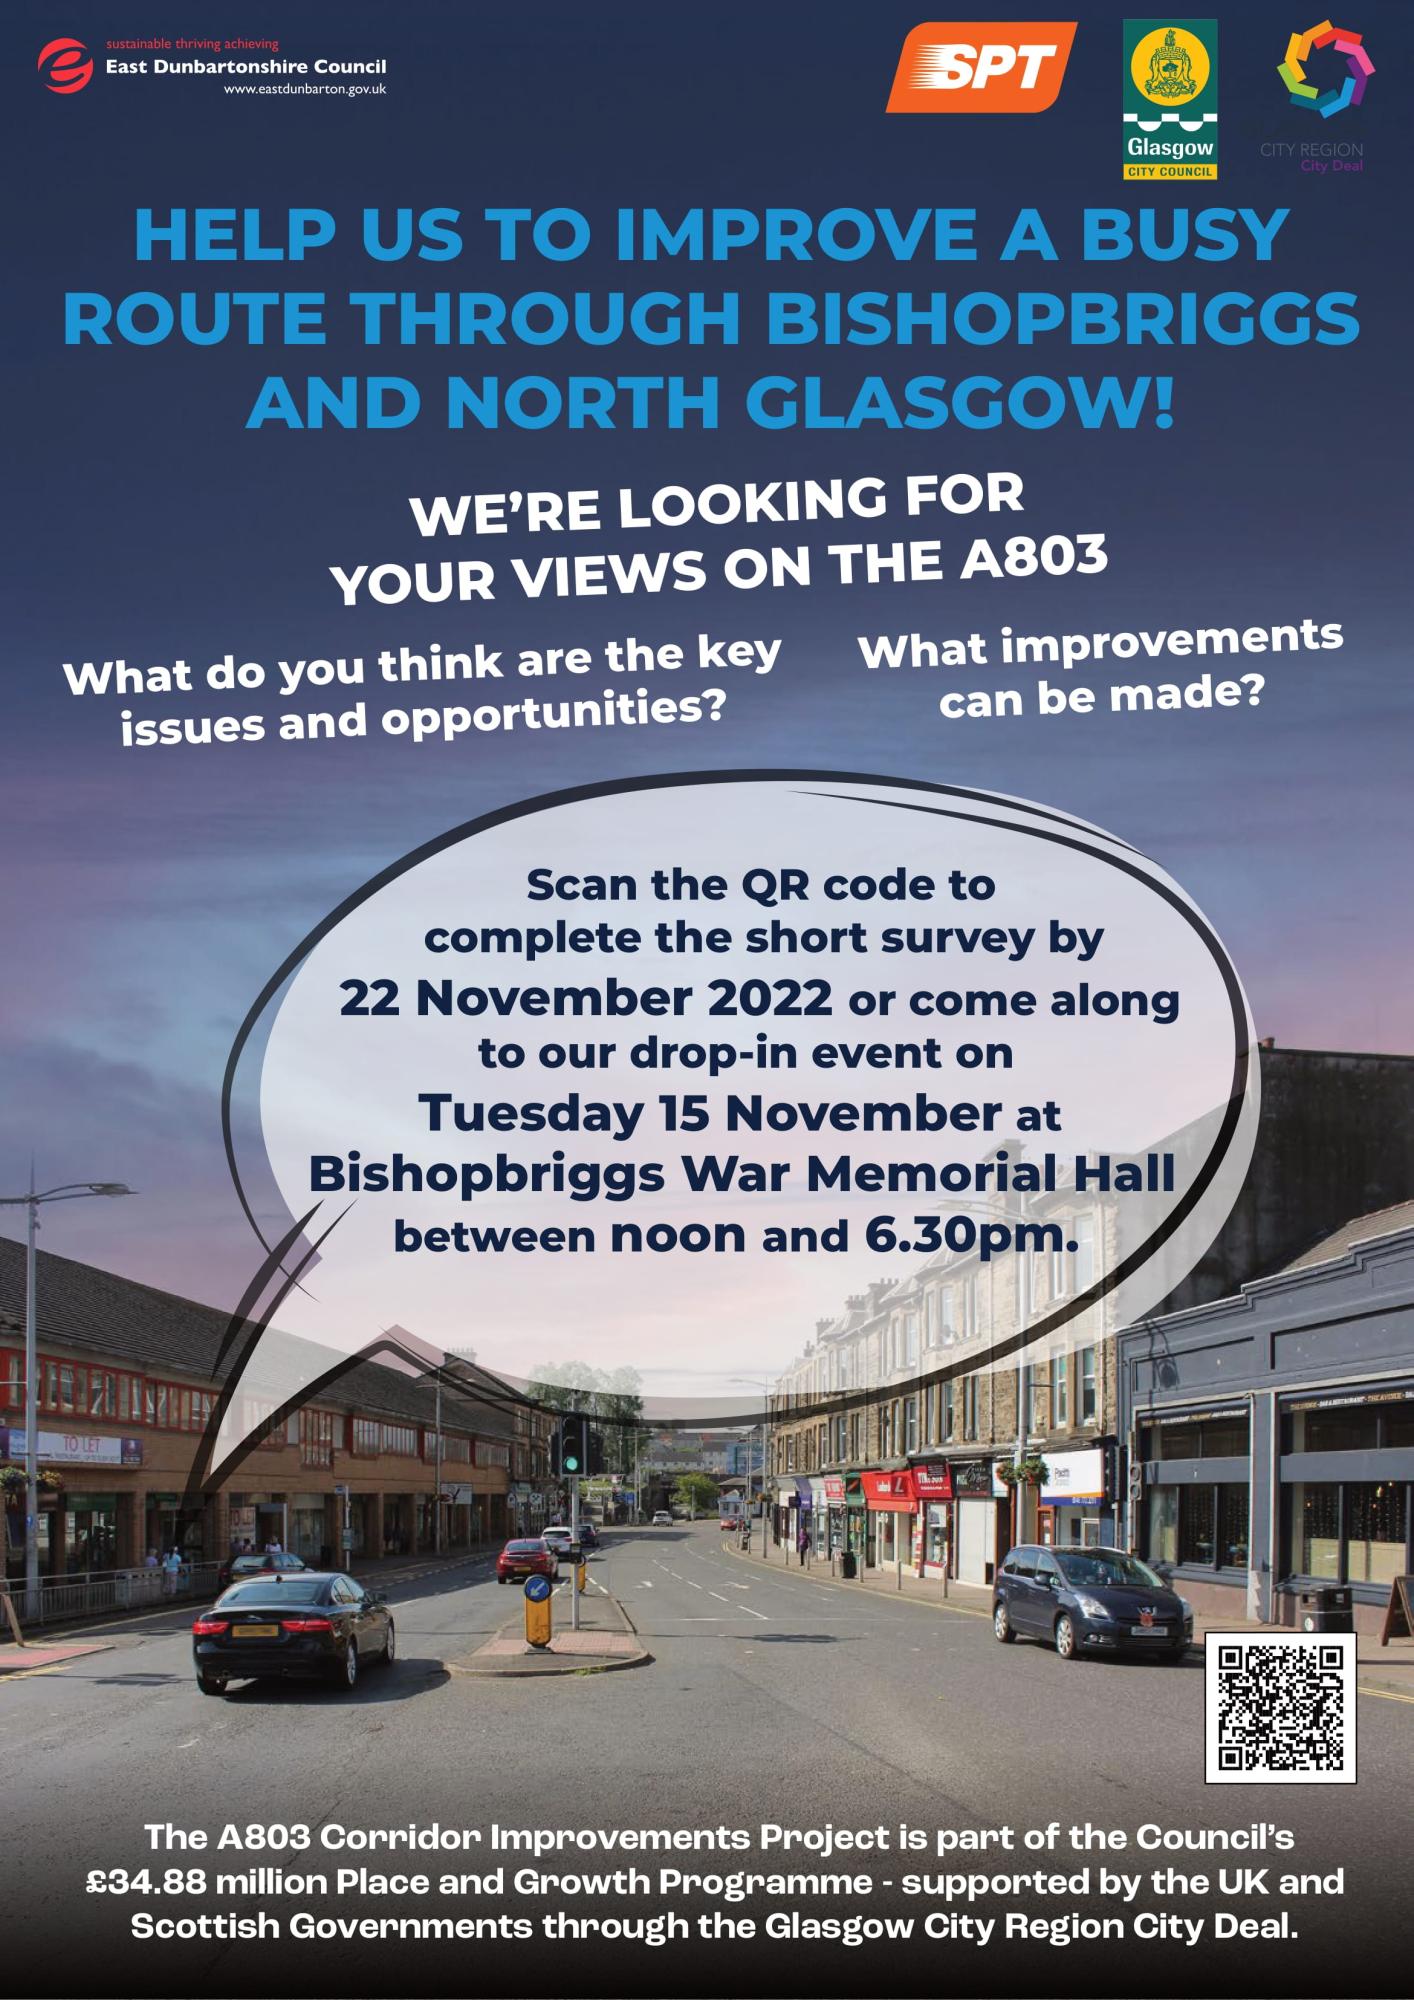 Flyer providing info available within article - asking people to help improve the A803